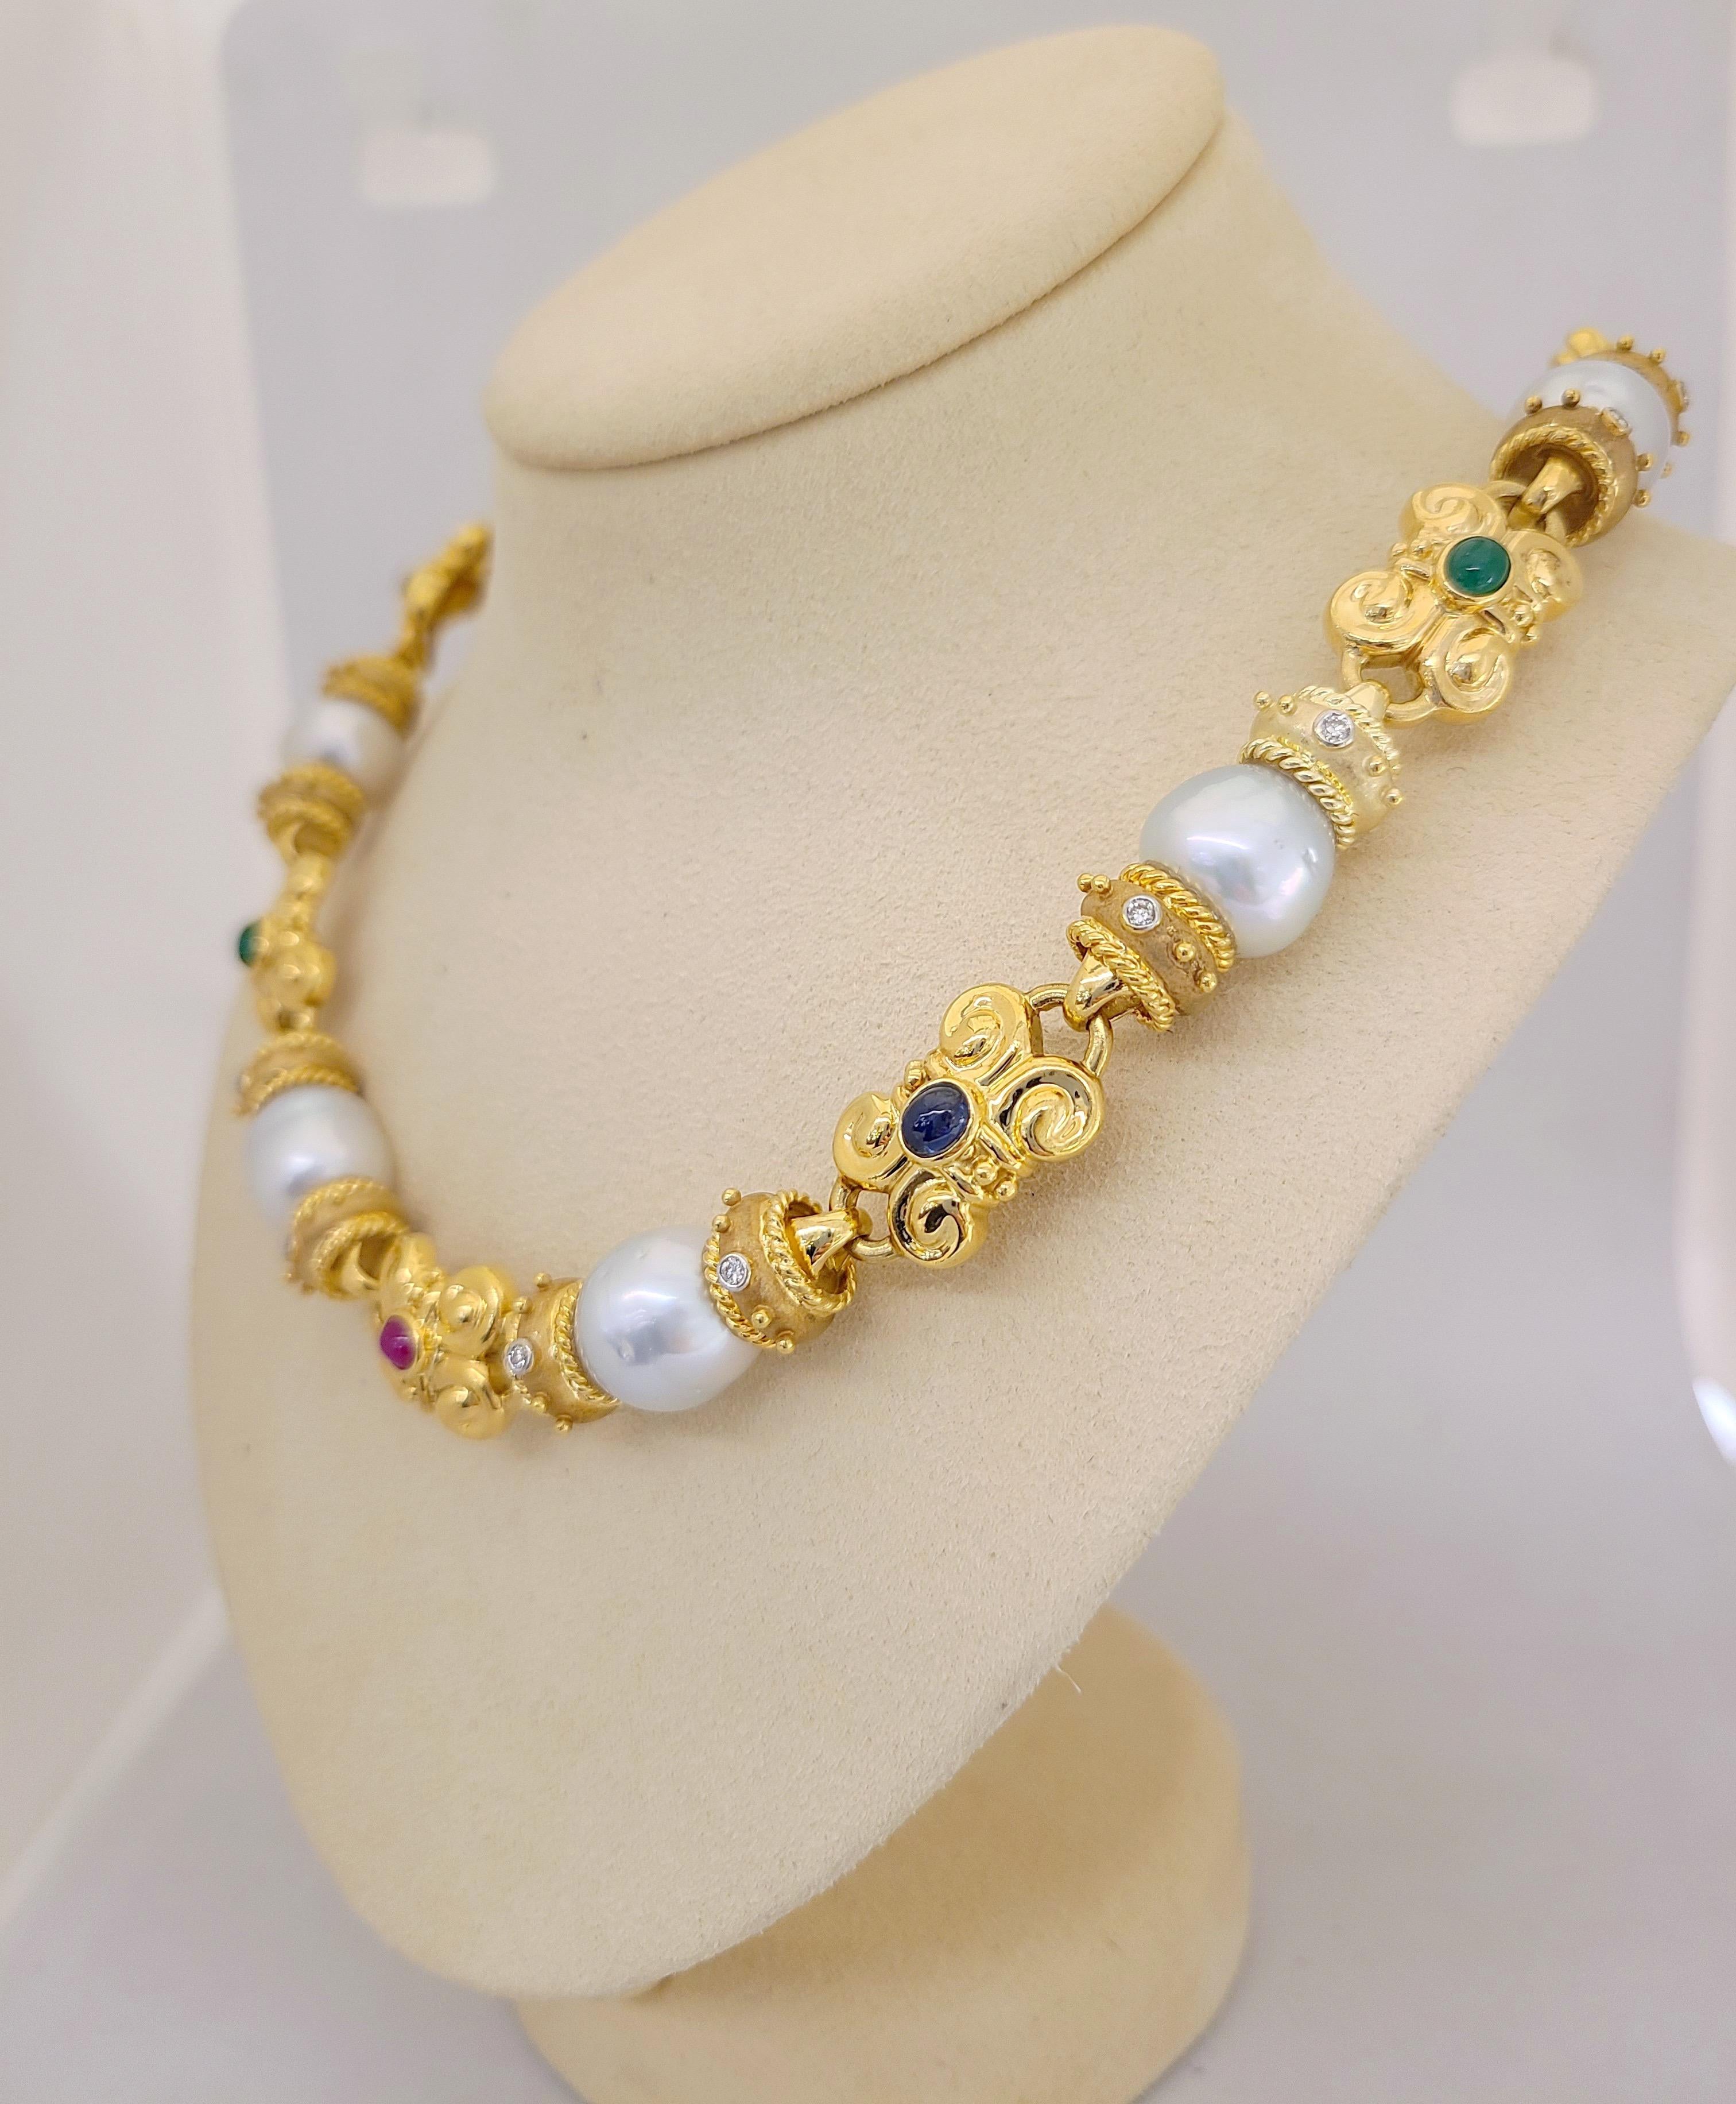 A very regal and classic  Cellini Jewelers NYC 18 karat yellow gold  link necklace. Nine links are set with south sea pearls accented with bezel set round brilliant diamonds. The nine alternating links are a scroll motif set with cabochon ruby,